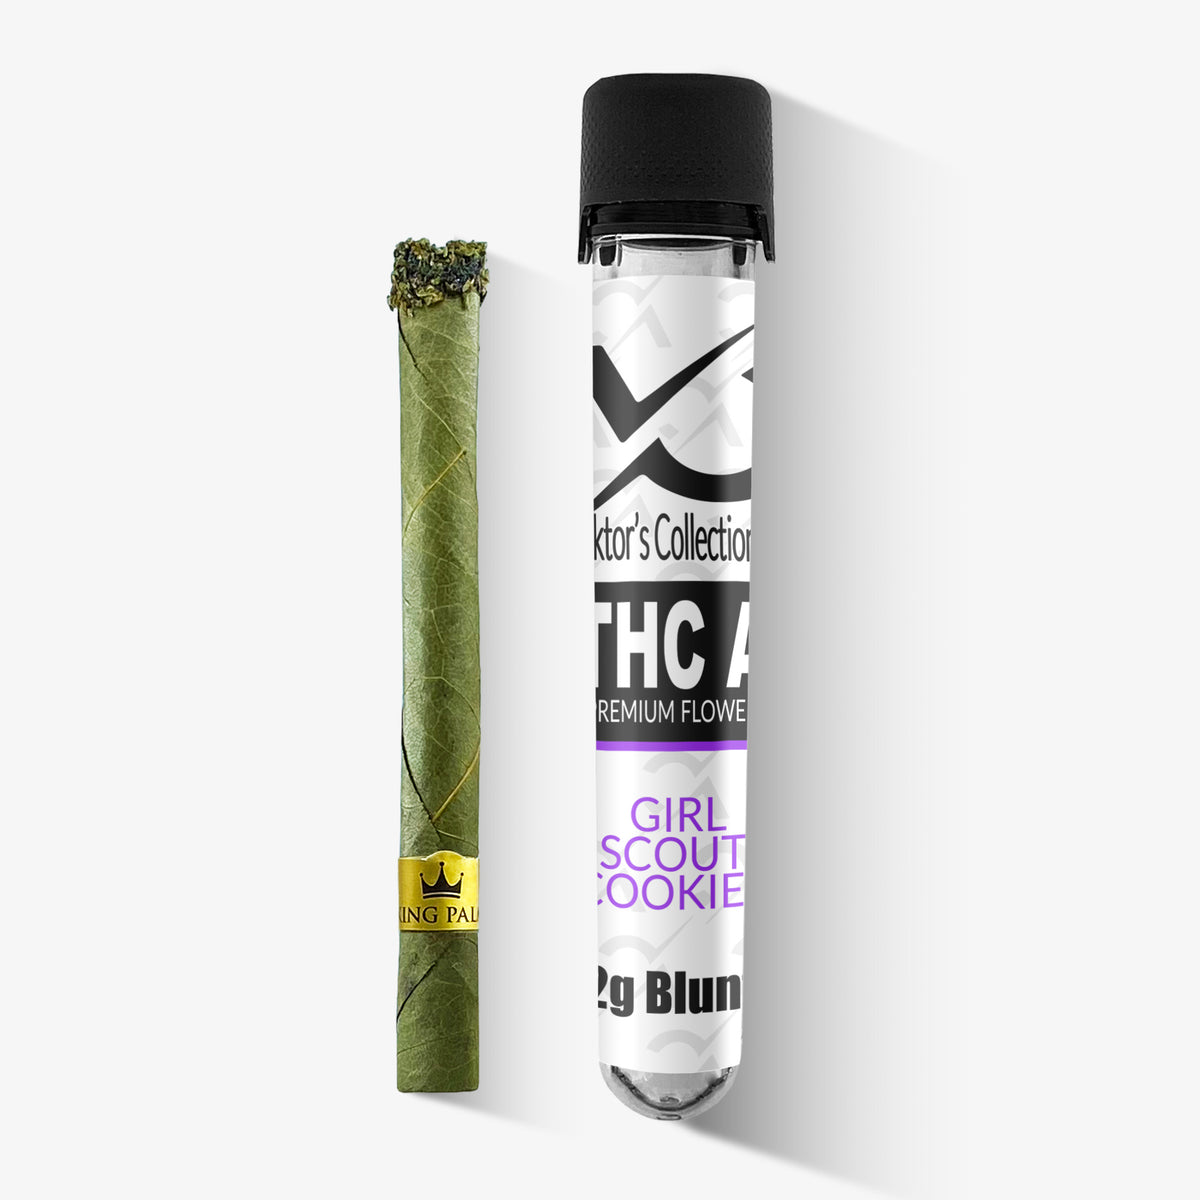 victor's collection thc-a flower girl scout cookies 2 gram blunt